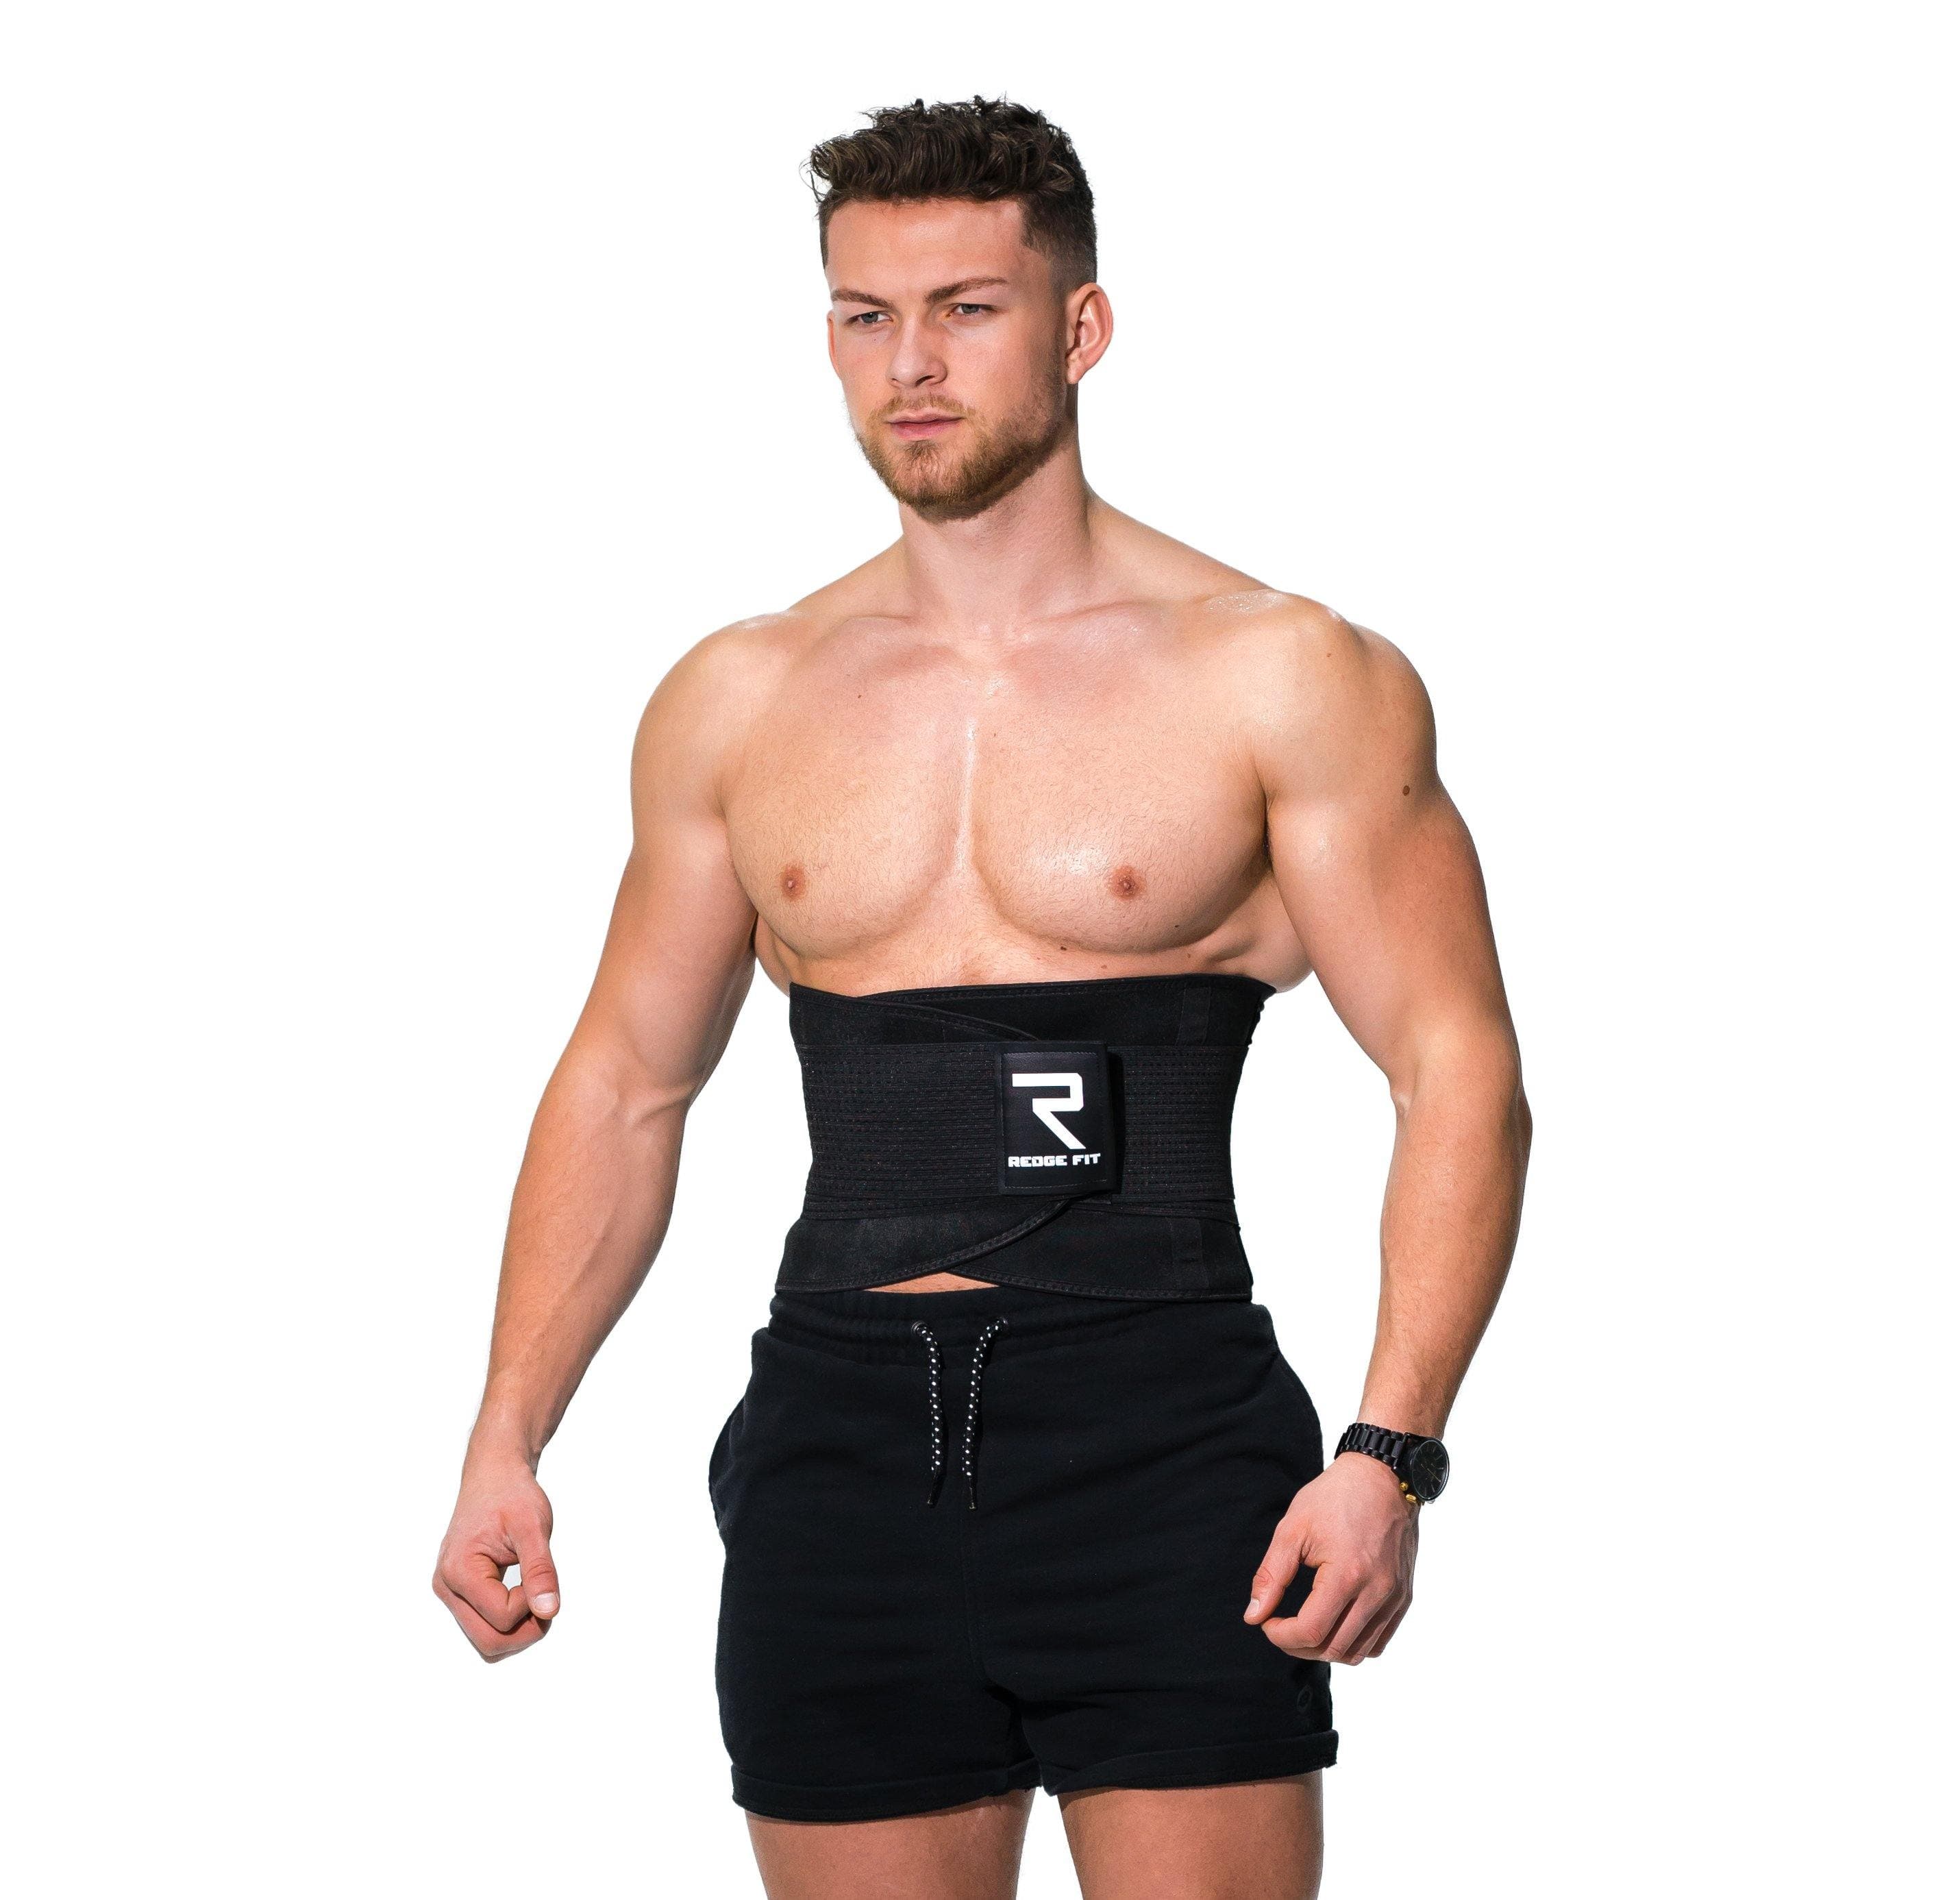 Man modeling the Redge Fit Core Focus Pro Sweat Belt Available at https://www.getredge.com/products/core-pro-pack